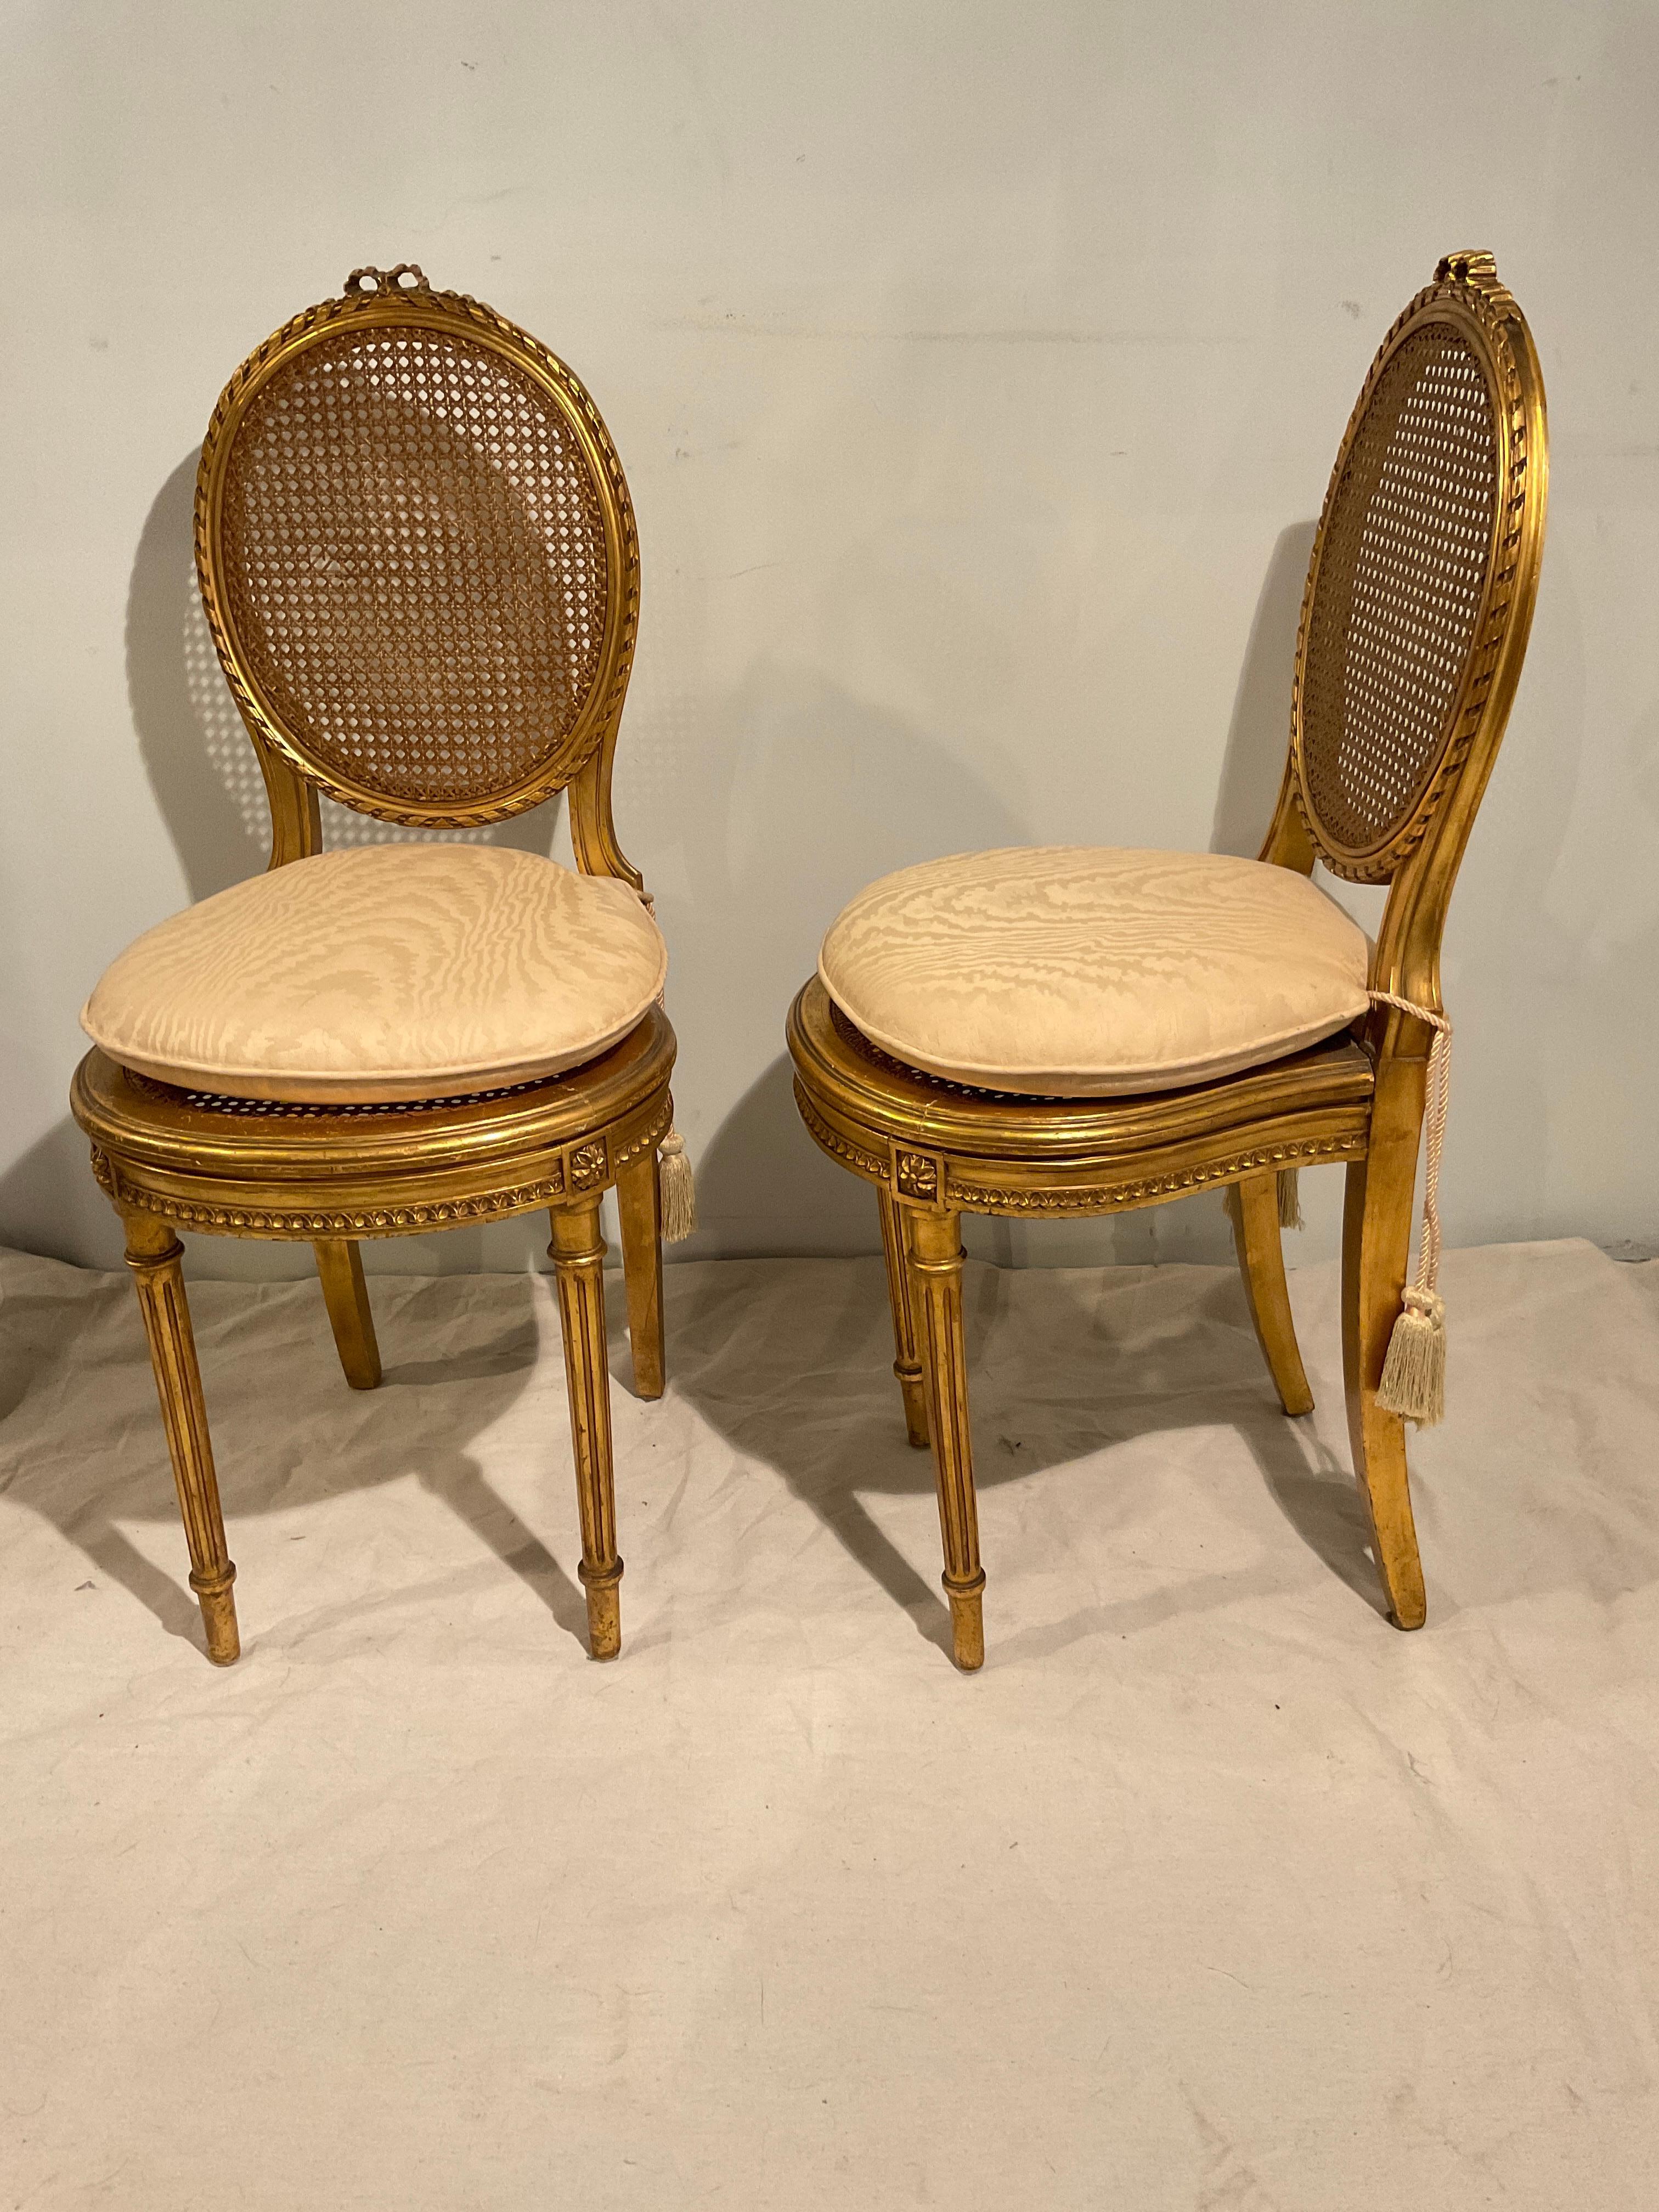 Pair of 1920s French gilt carved wood Louis XVI petite chairs .Hole in caning on back of one chair.